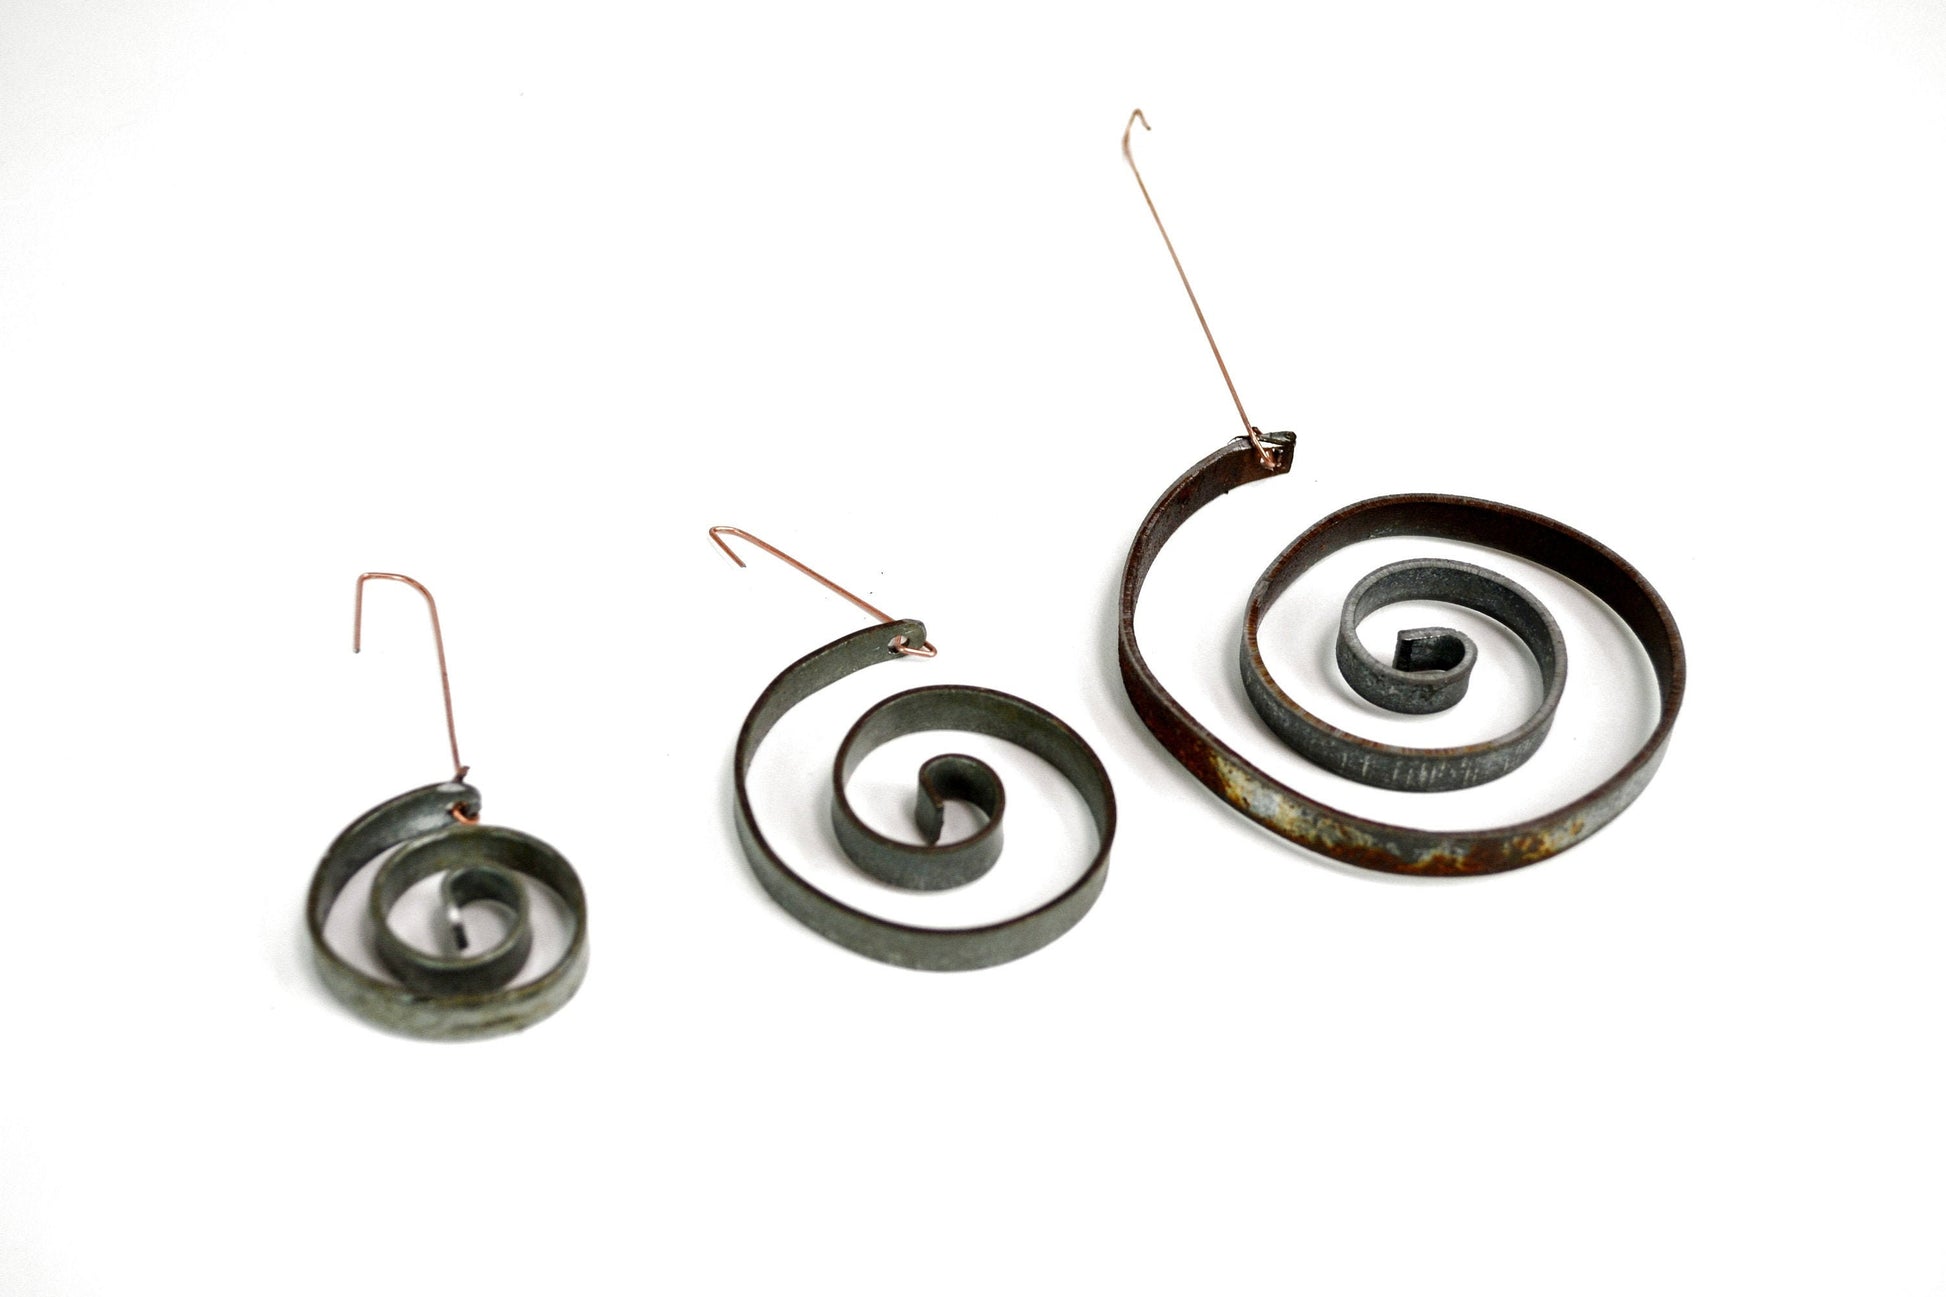 Wine Barrel Ring Ornaments Set of 3 - Parau - Made from retired California wine barrel rings. 100% Recycled!